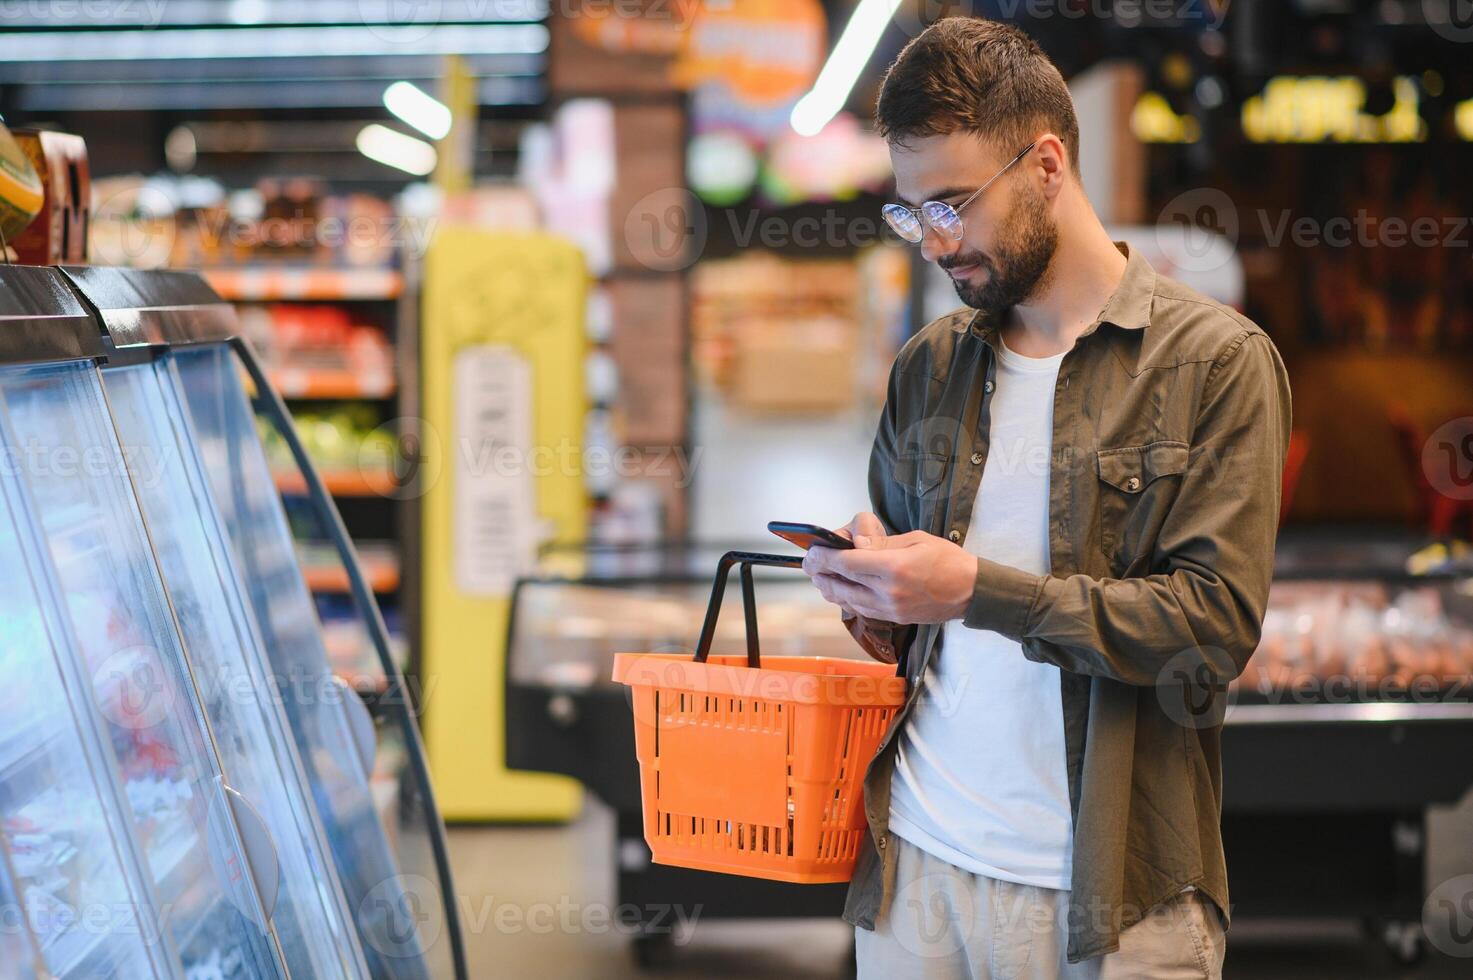 Quick text during shopping. Handsome young man holding mobile phone and smiling while standing in a food store photo